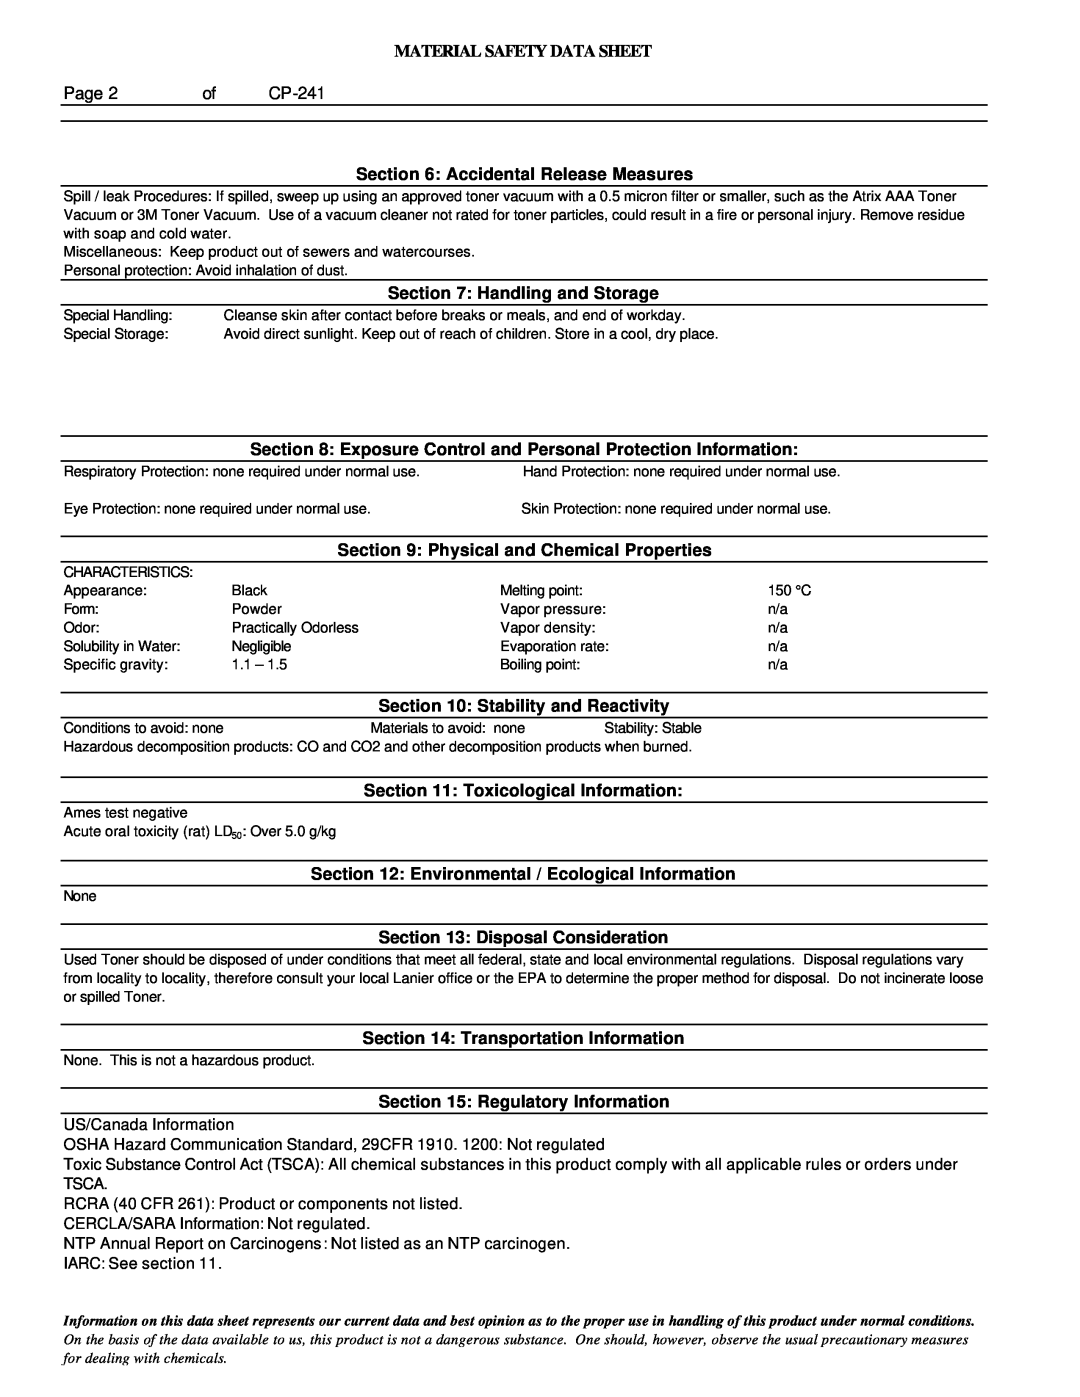 Lanier 6213 manual Material Safety Data Sheet, Accidental Release Measures 